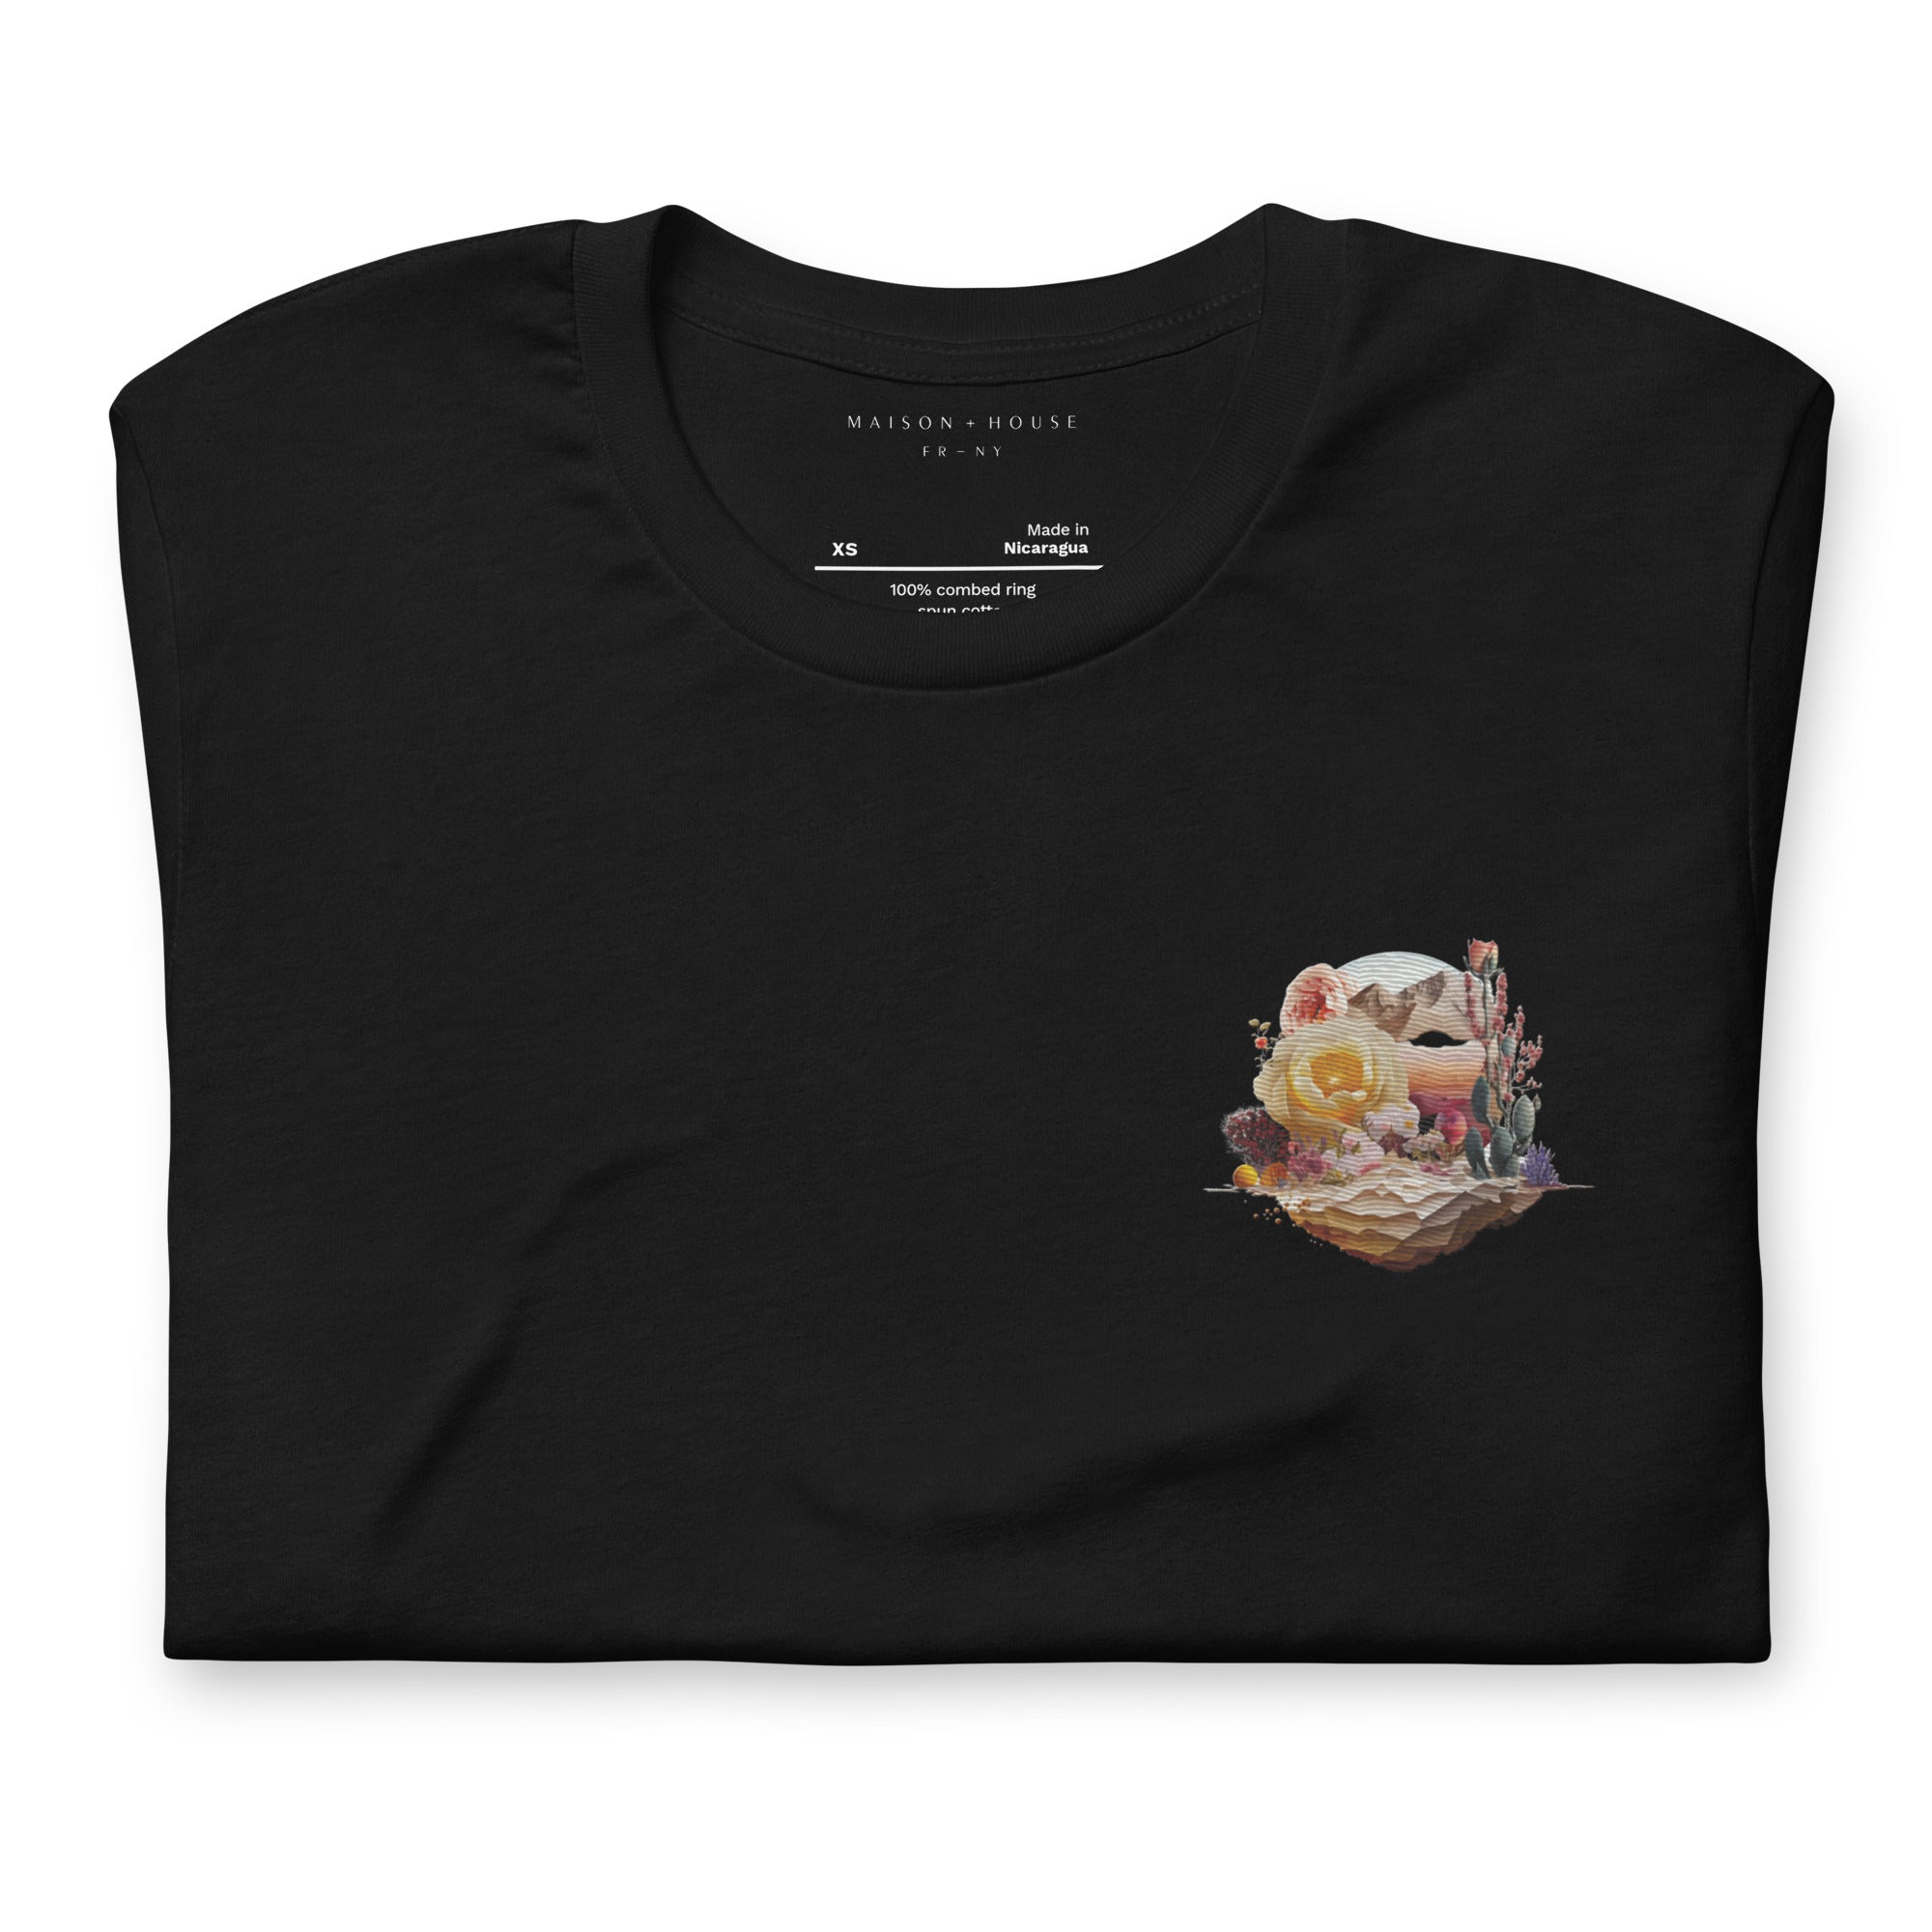 Through the Roses Comfort Tee